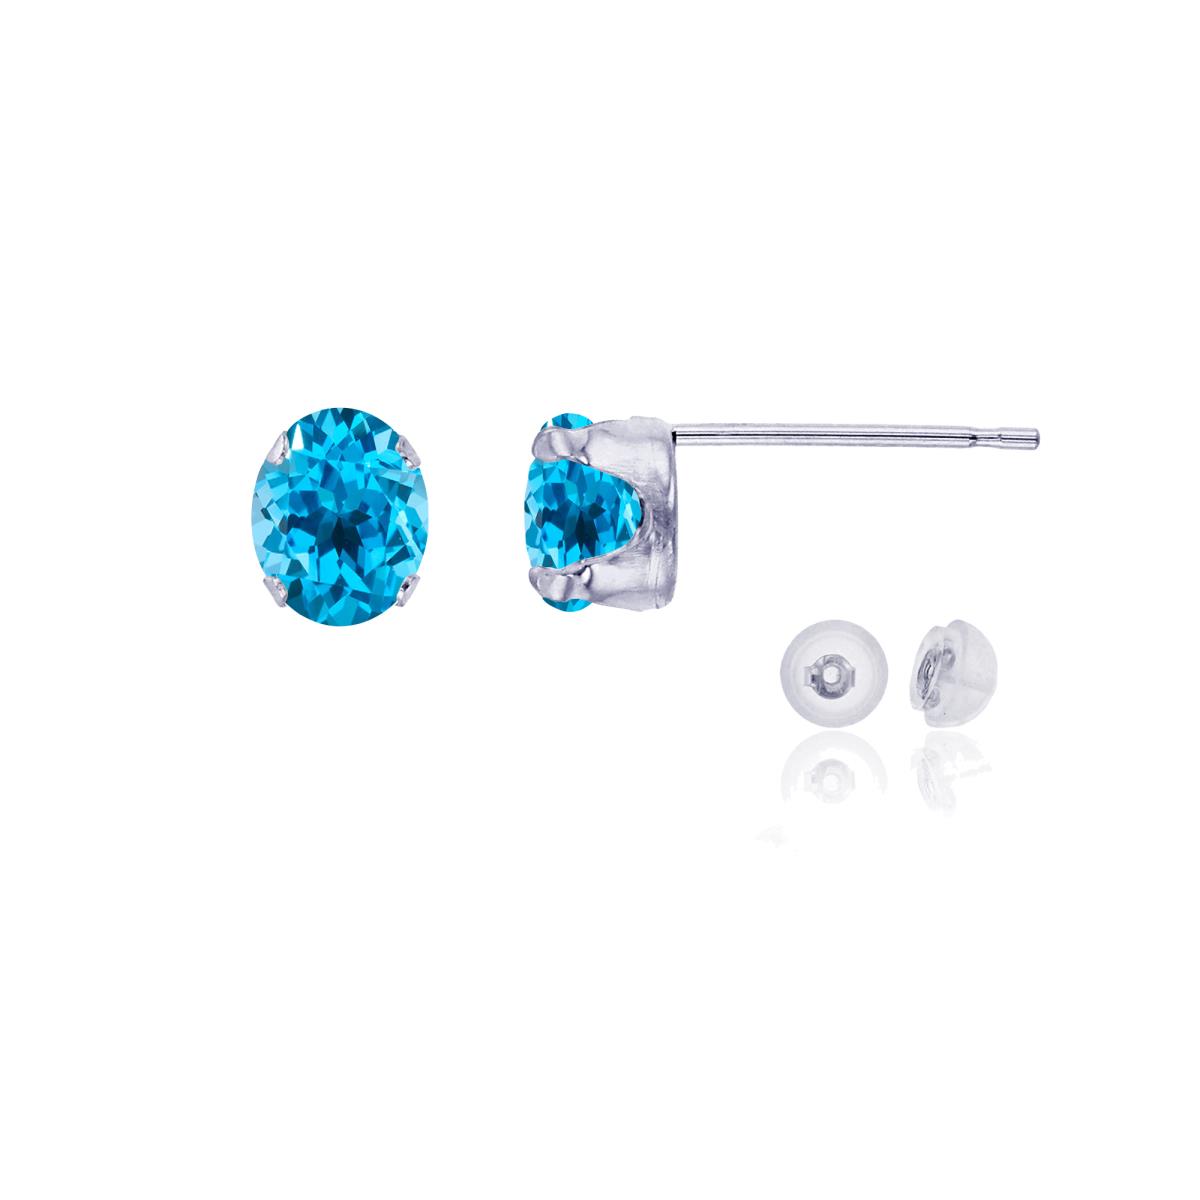 10K White Gold 6x4mm Oval Swiss Blue Topaz Stud Earring with Silicone Back